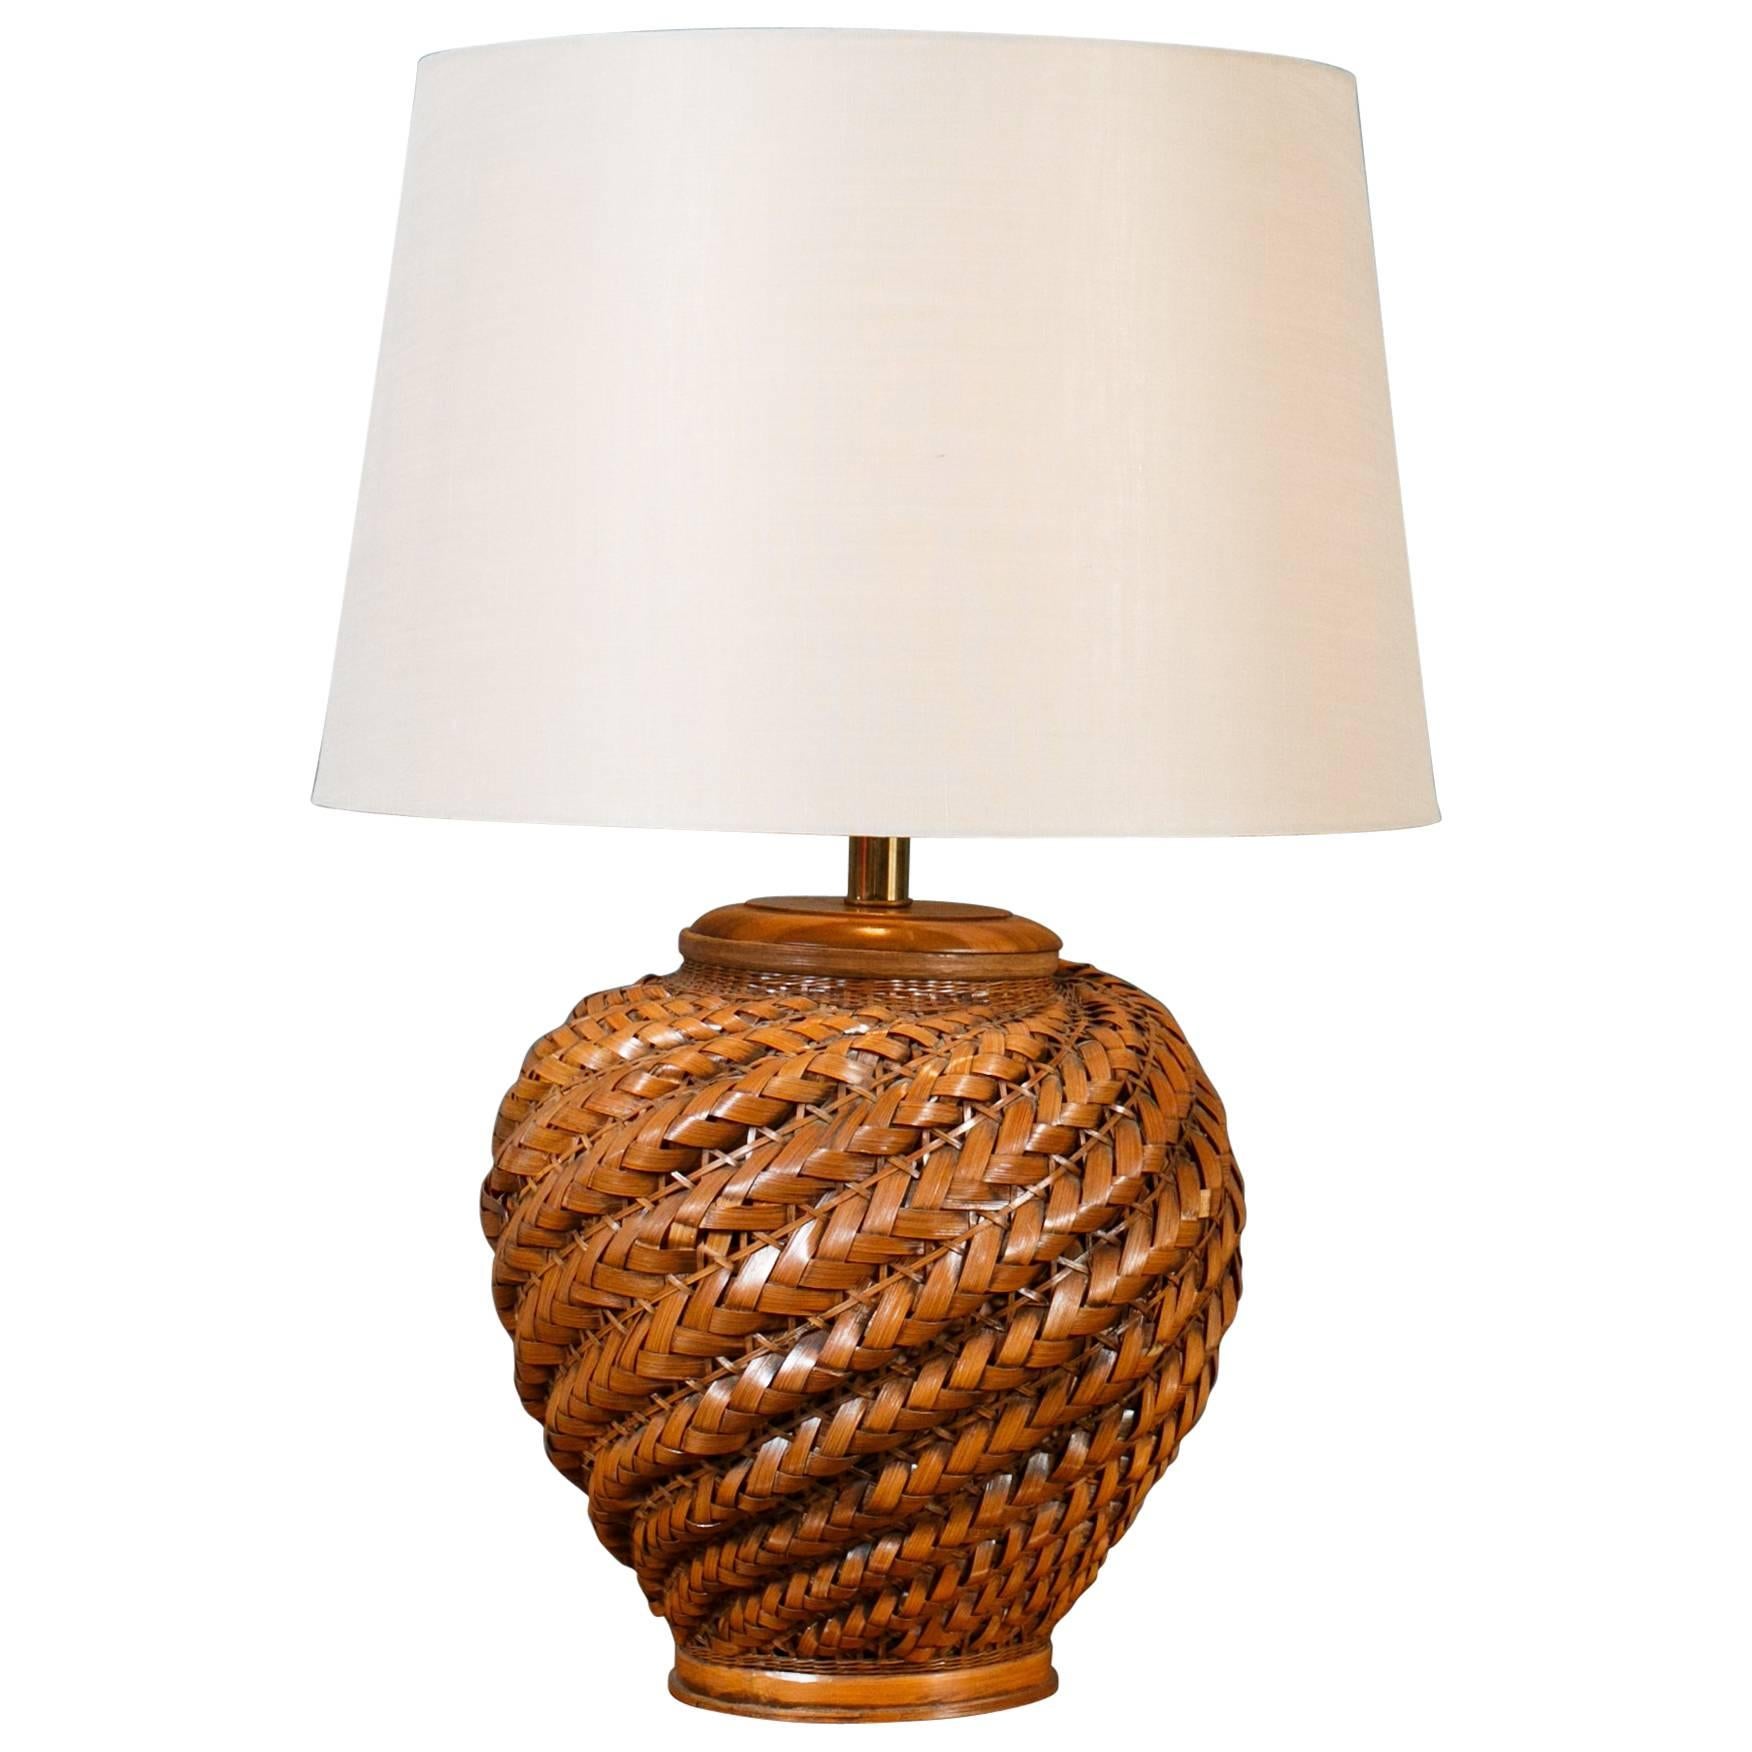 Vintage Rattan Table Lamp with Shade